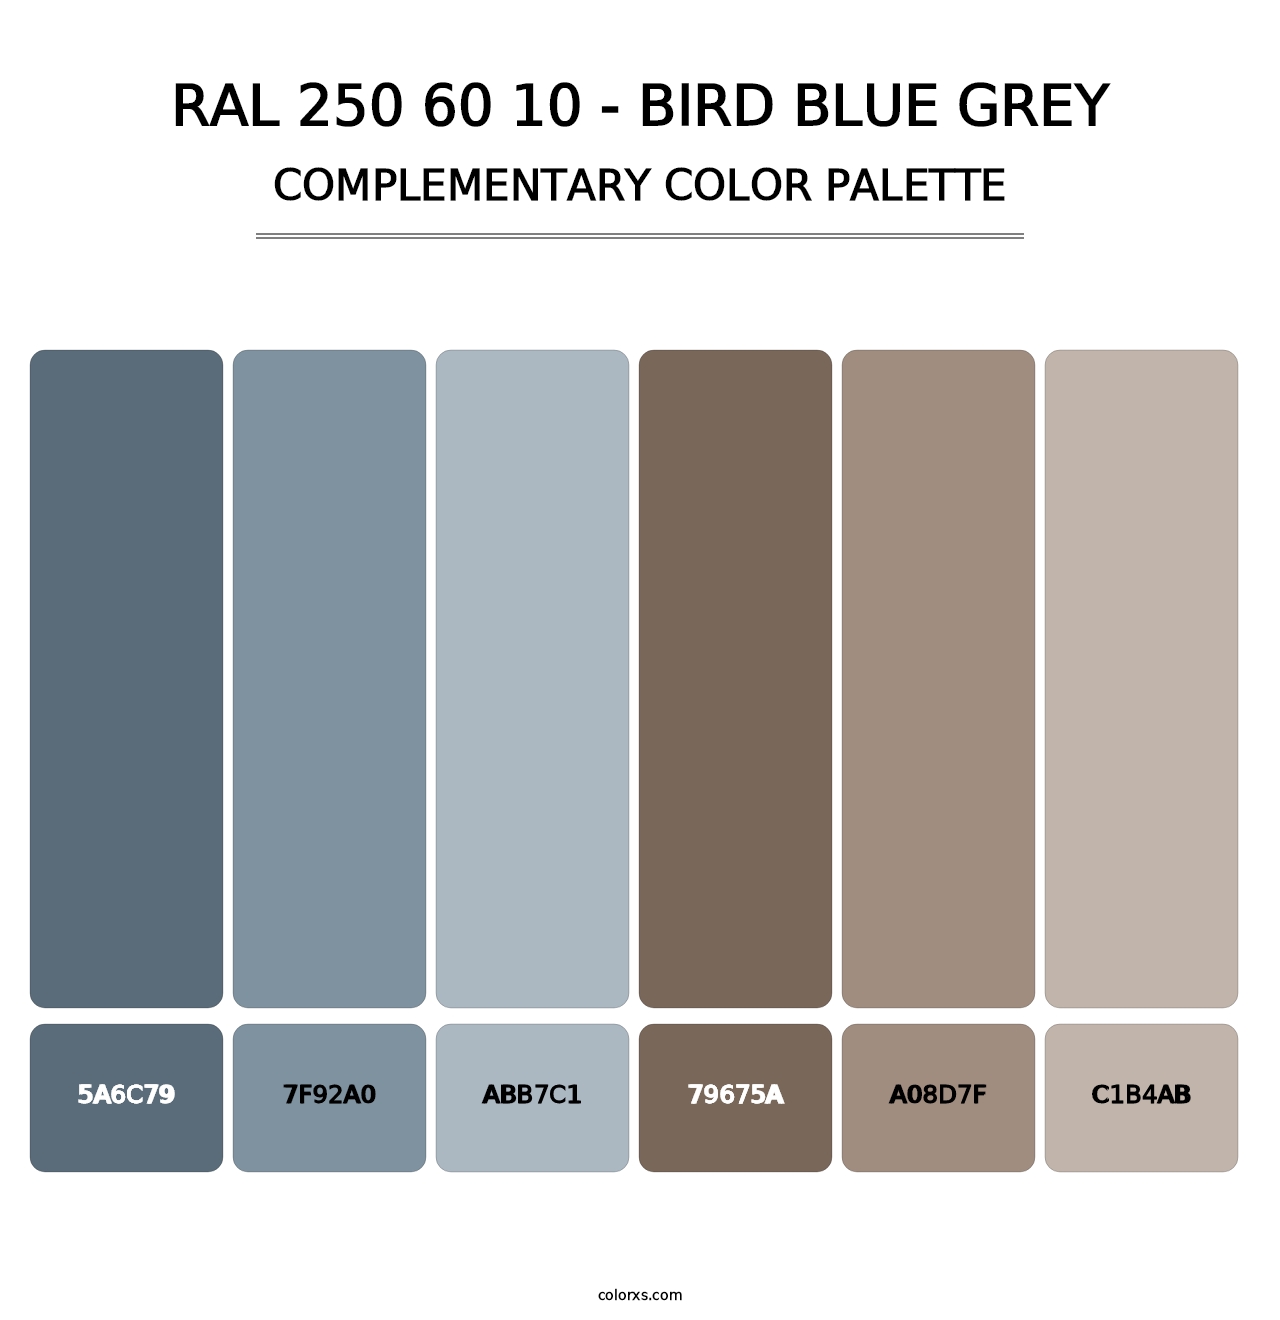 RAL 250 60 10 - Bird Blue Grey - Complementary Color Palette